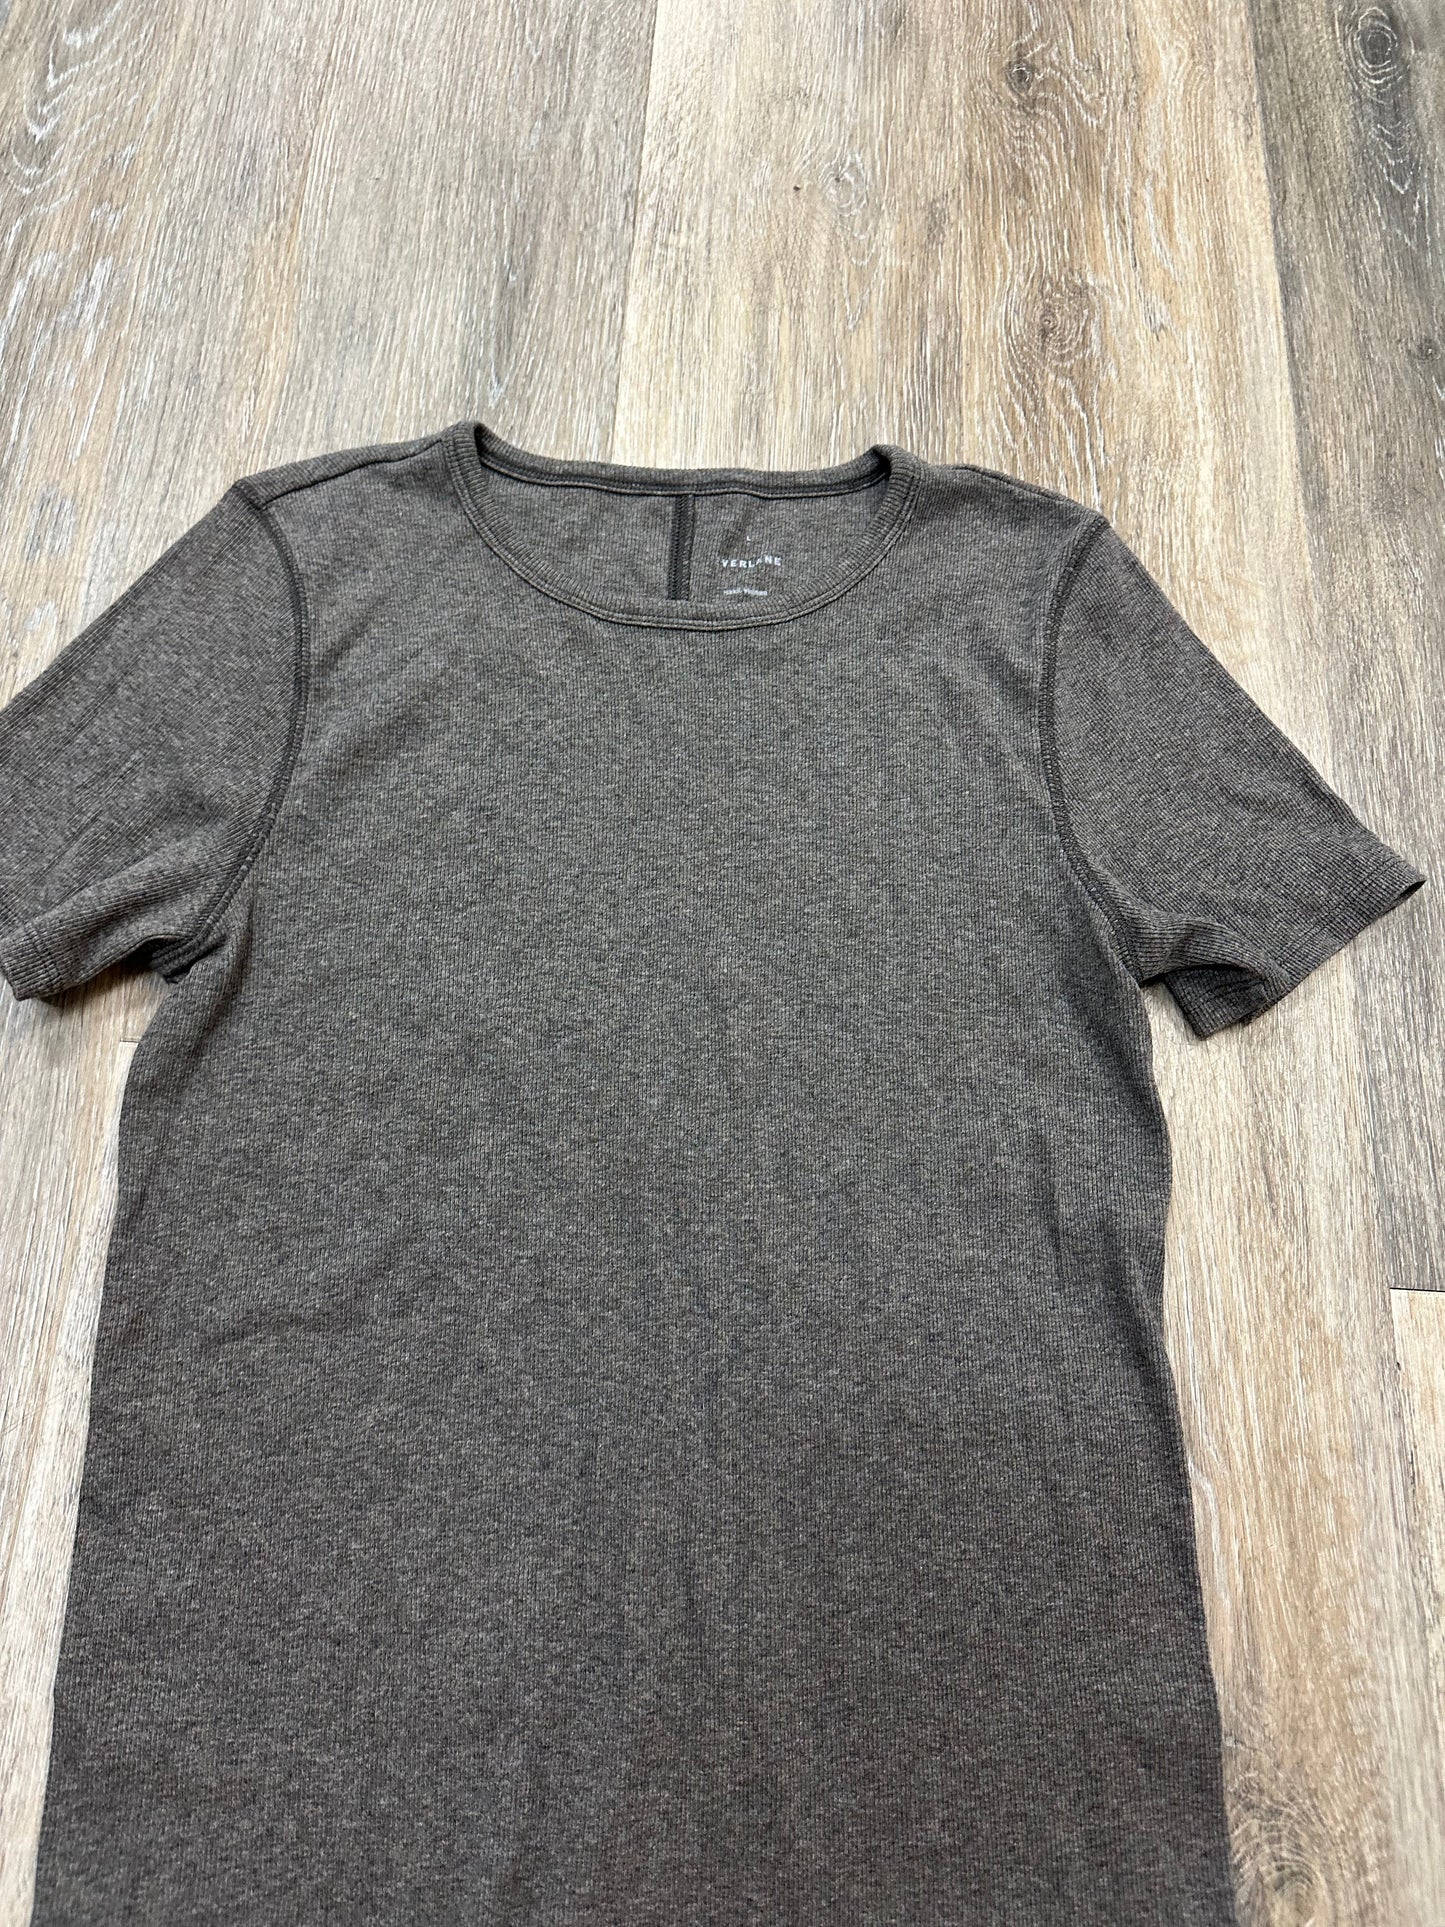 Brown Top Short Sleeve Everlane, Size L